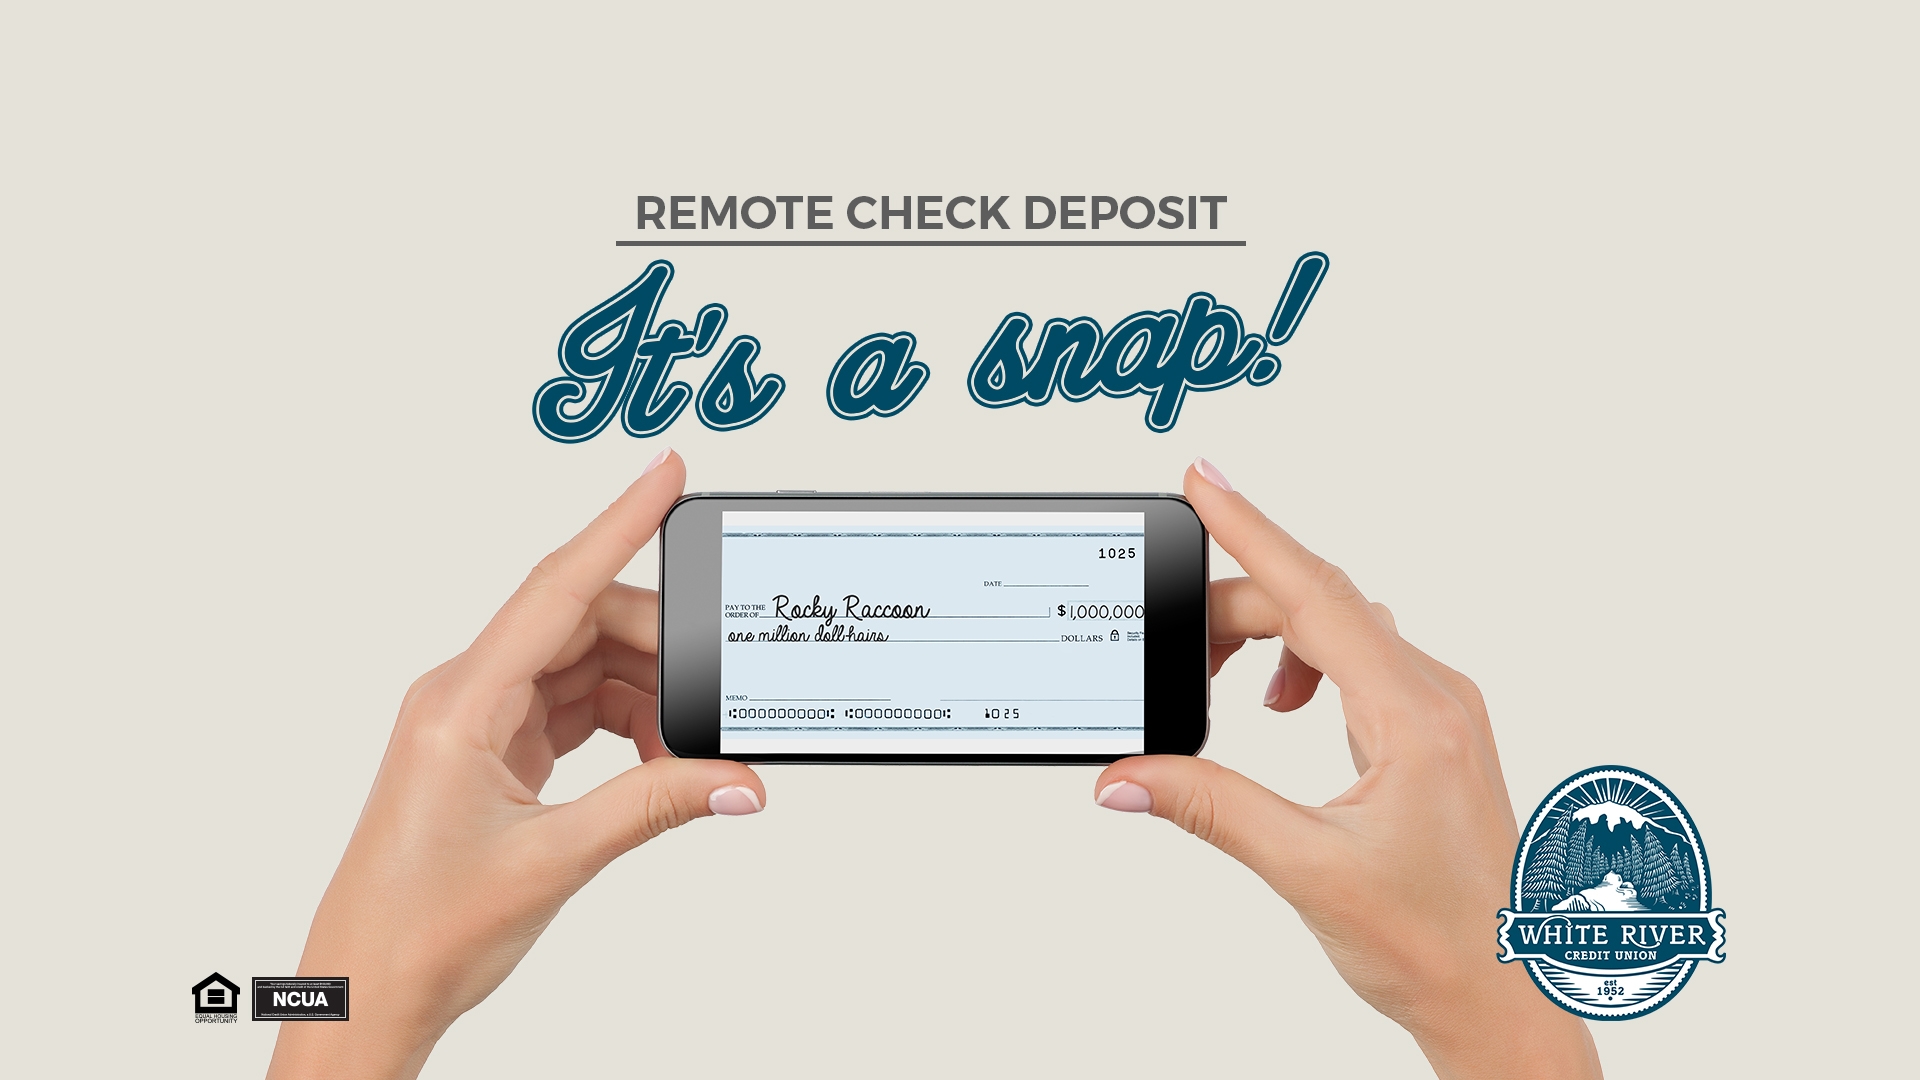 Remote check deposit It's a snap!